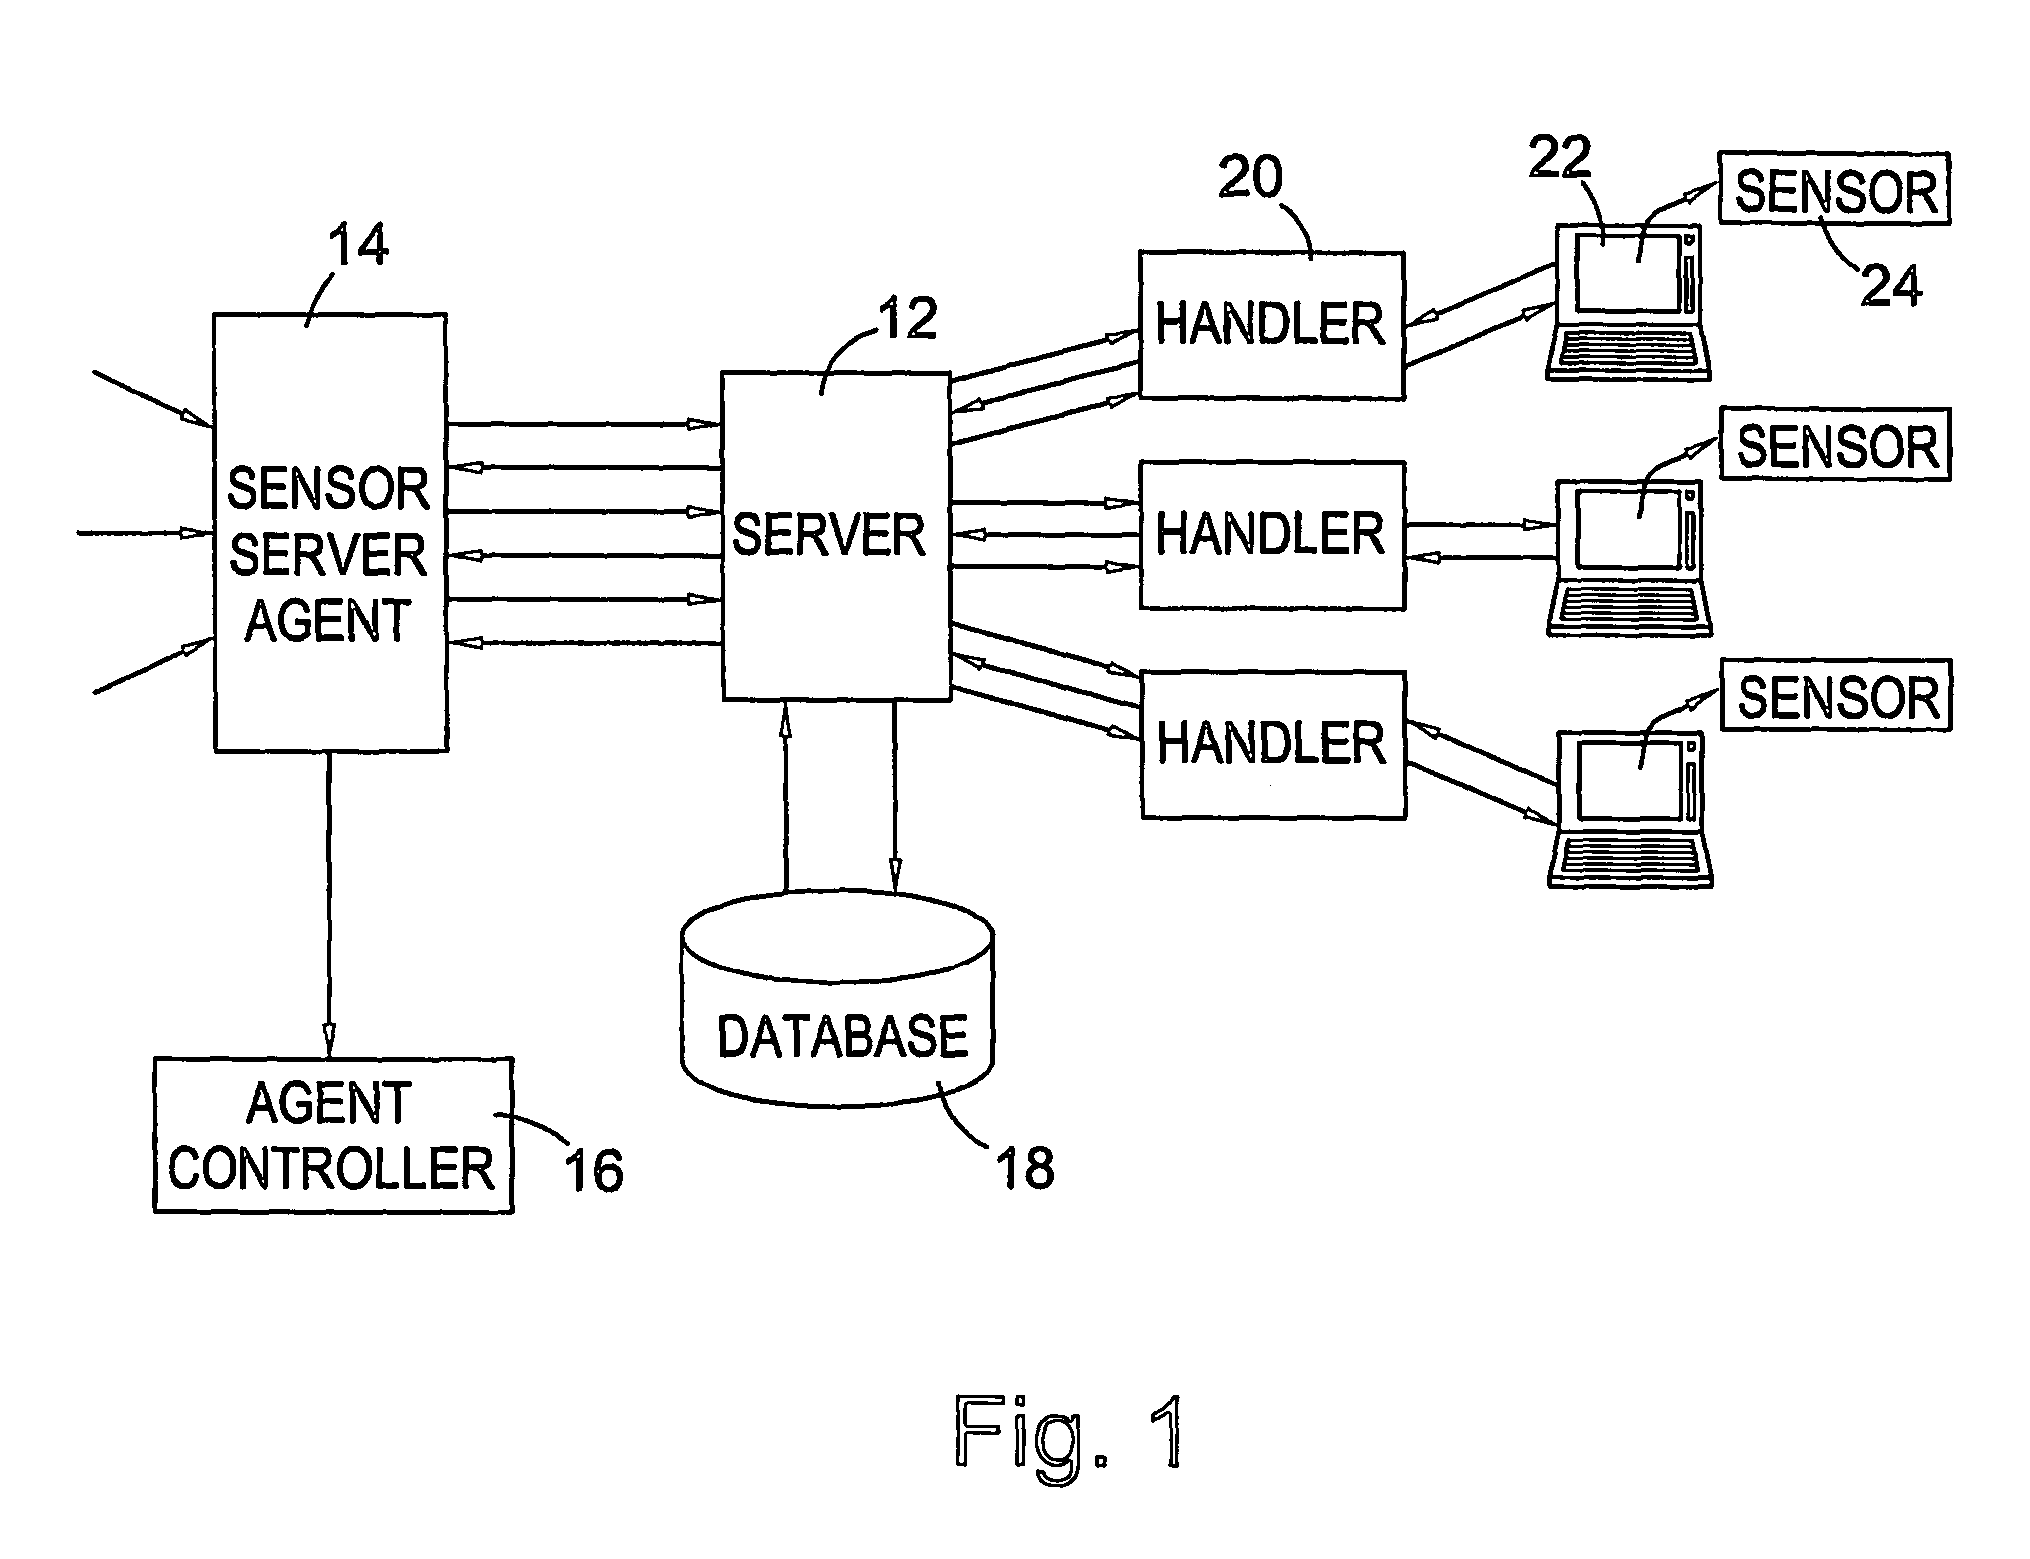 Remote monitoring by tracking, storing, and analyzing user interactions with an operating system of a data processing device